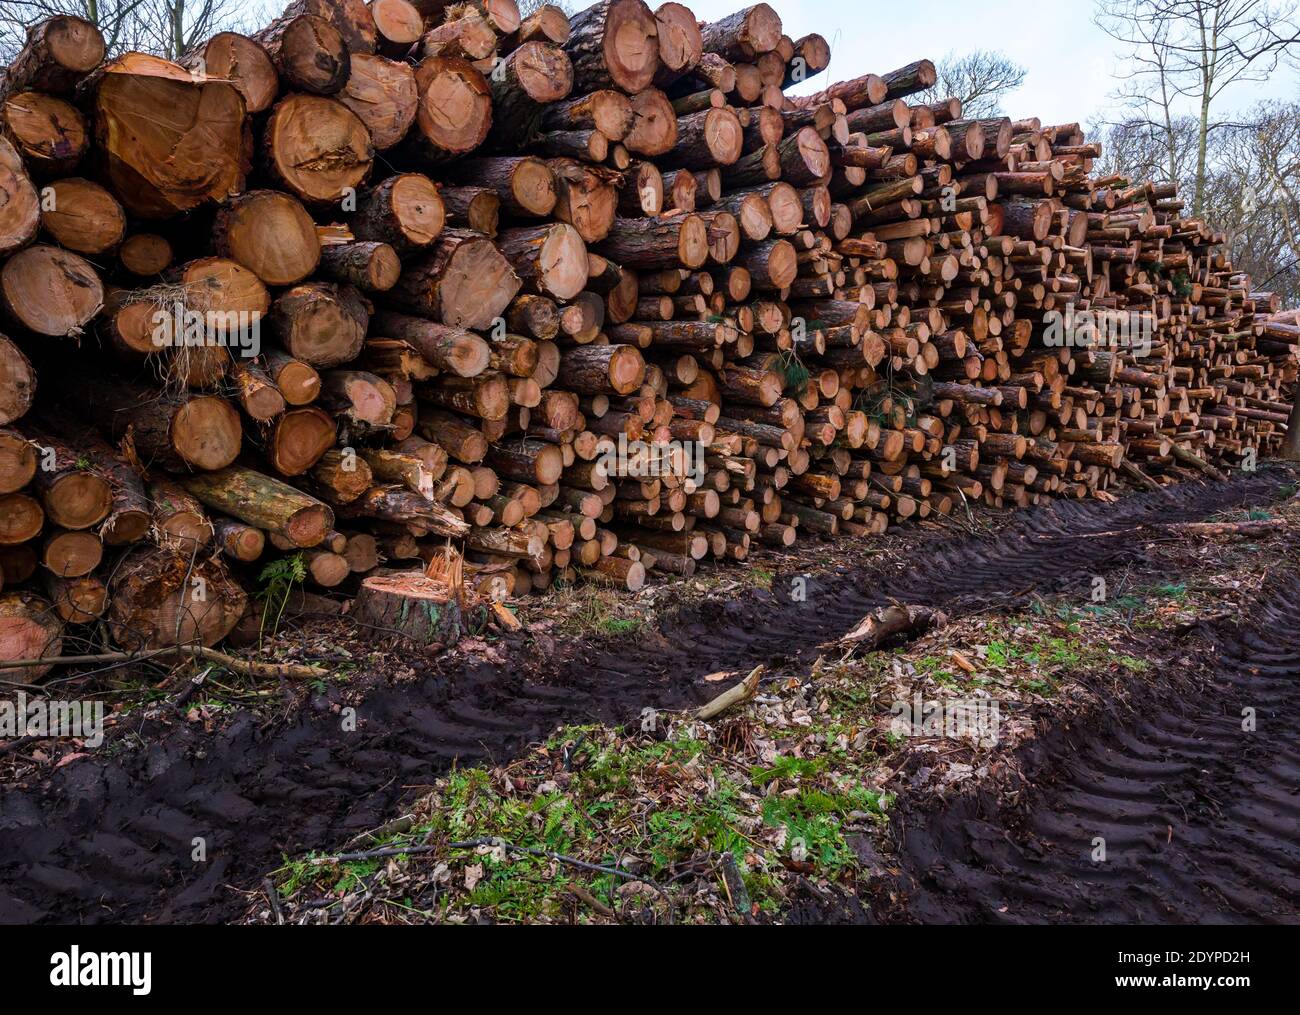 Forestry work and tree felling in woodland with large timber pile of logs, East Lothian, Scotland, UK Stock Photo